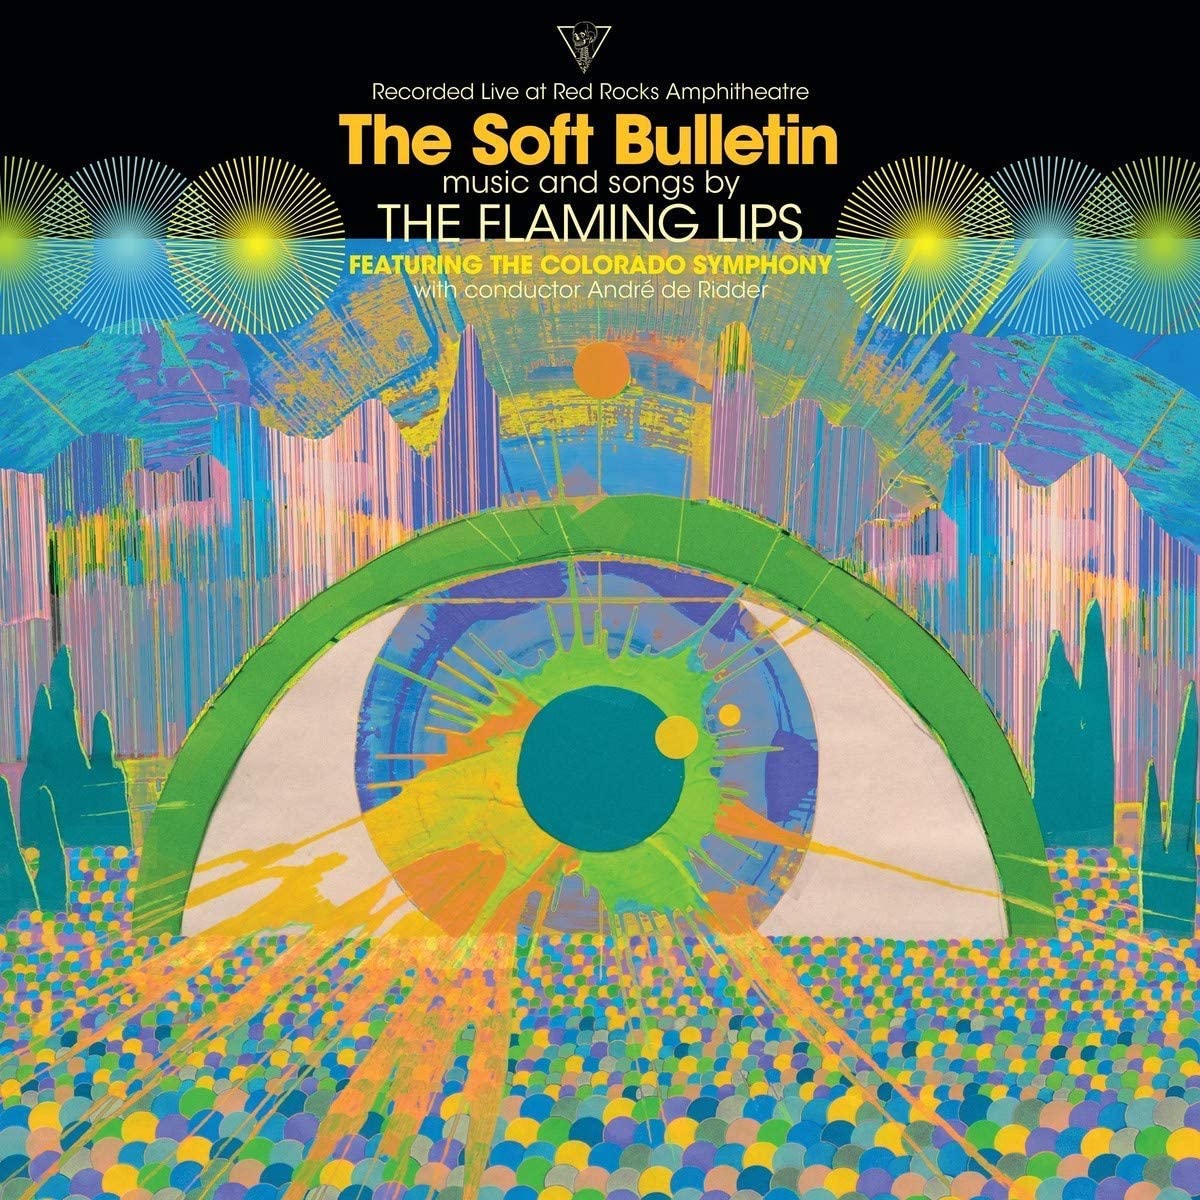 Vinyl - On 26th May 2016, The Flaming Lips performed their universally acclaimed 1999 album 'The Soft Bulletin' in its entirety